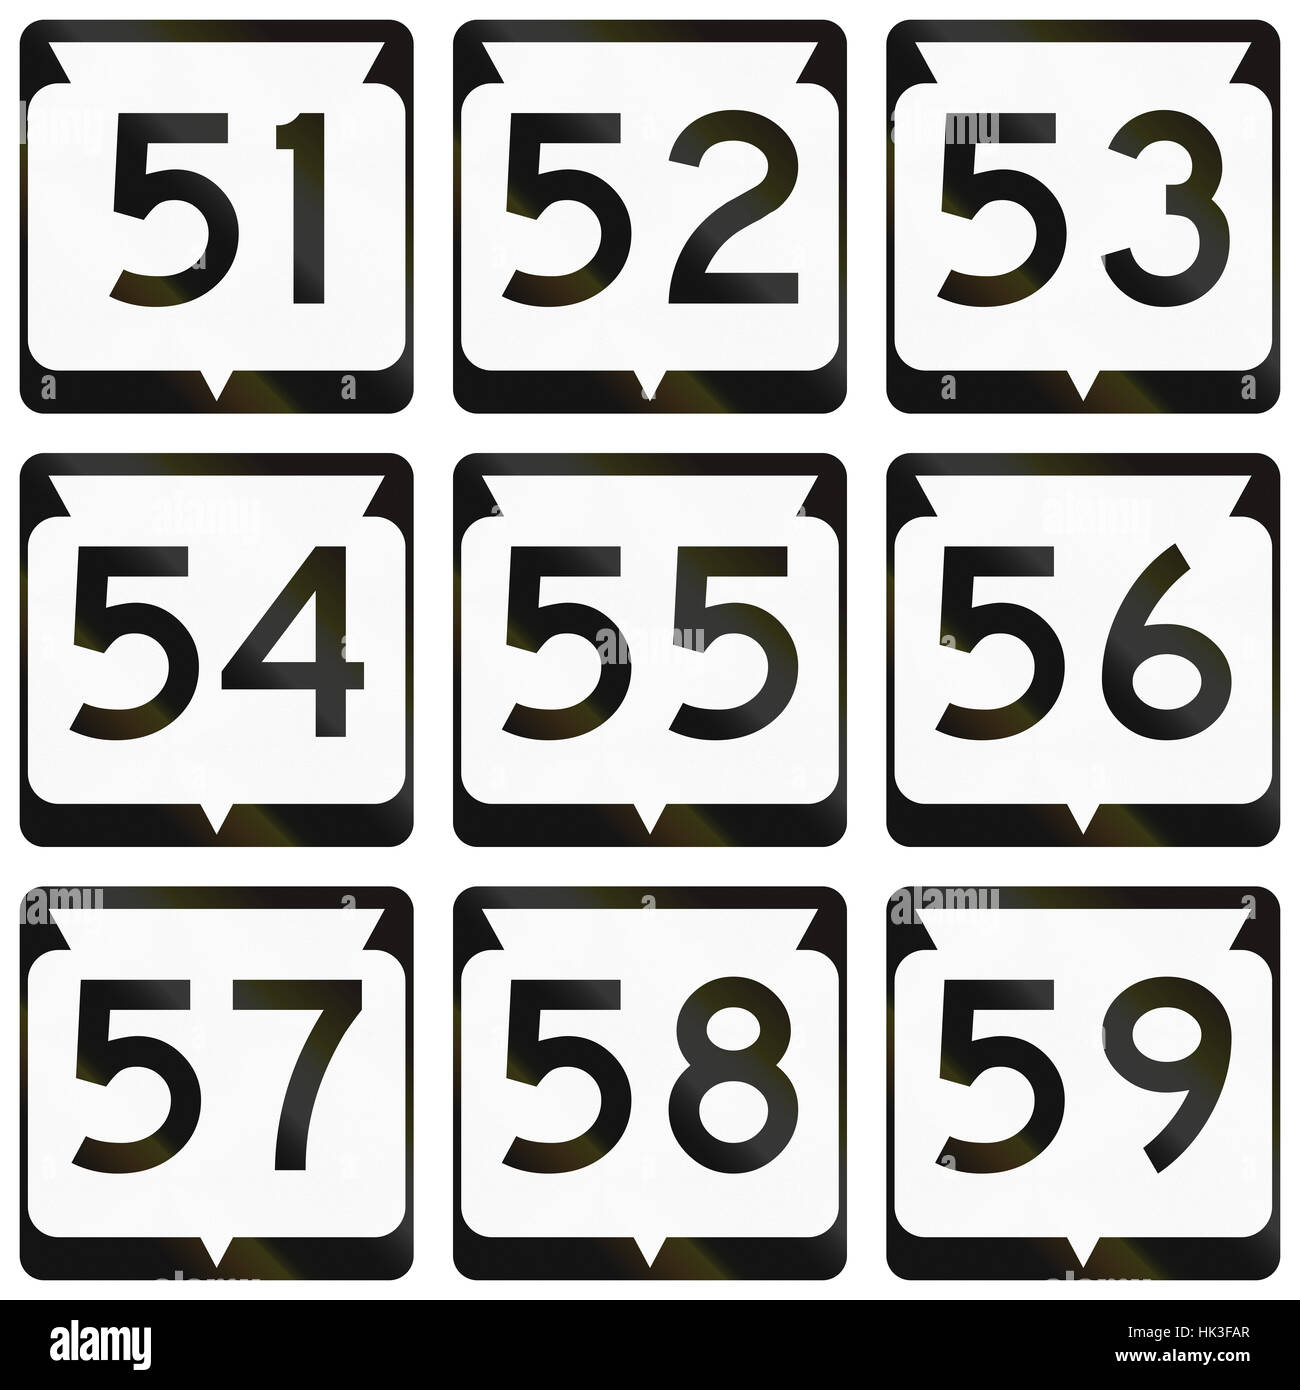 Collection of Wisconsin Route shields used in the USA. Stock Photo